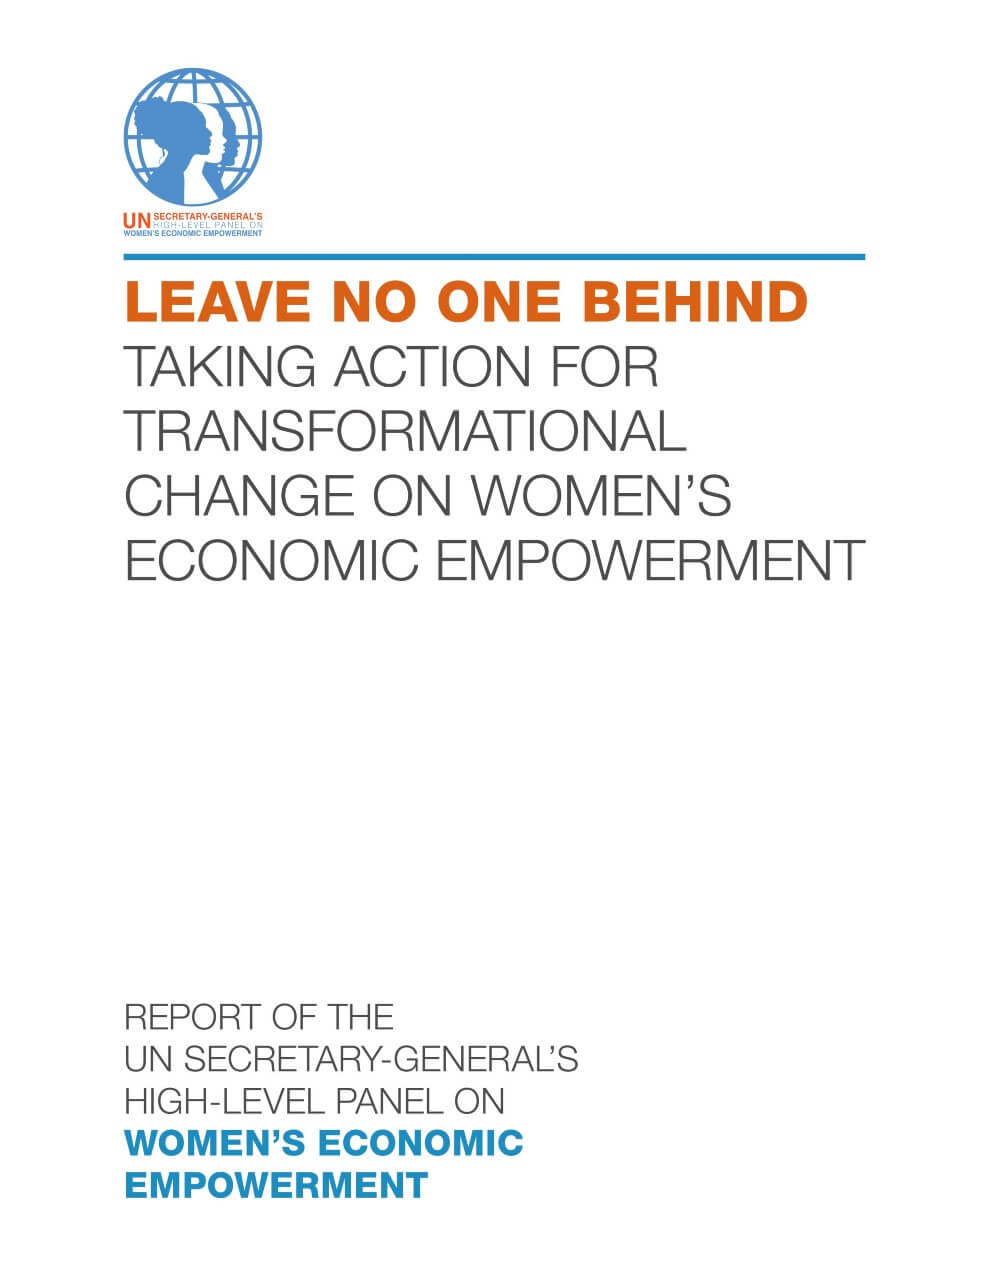 Leave no one behind: Taking action for transformational change on women’s economic empowerment